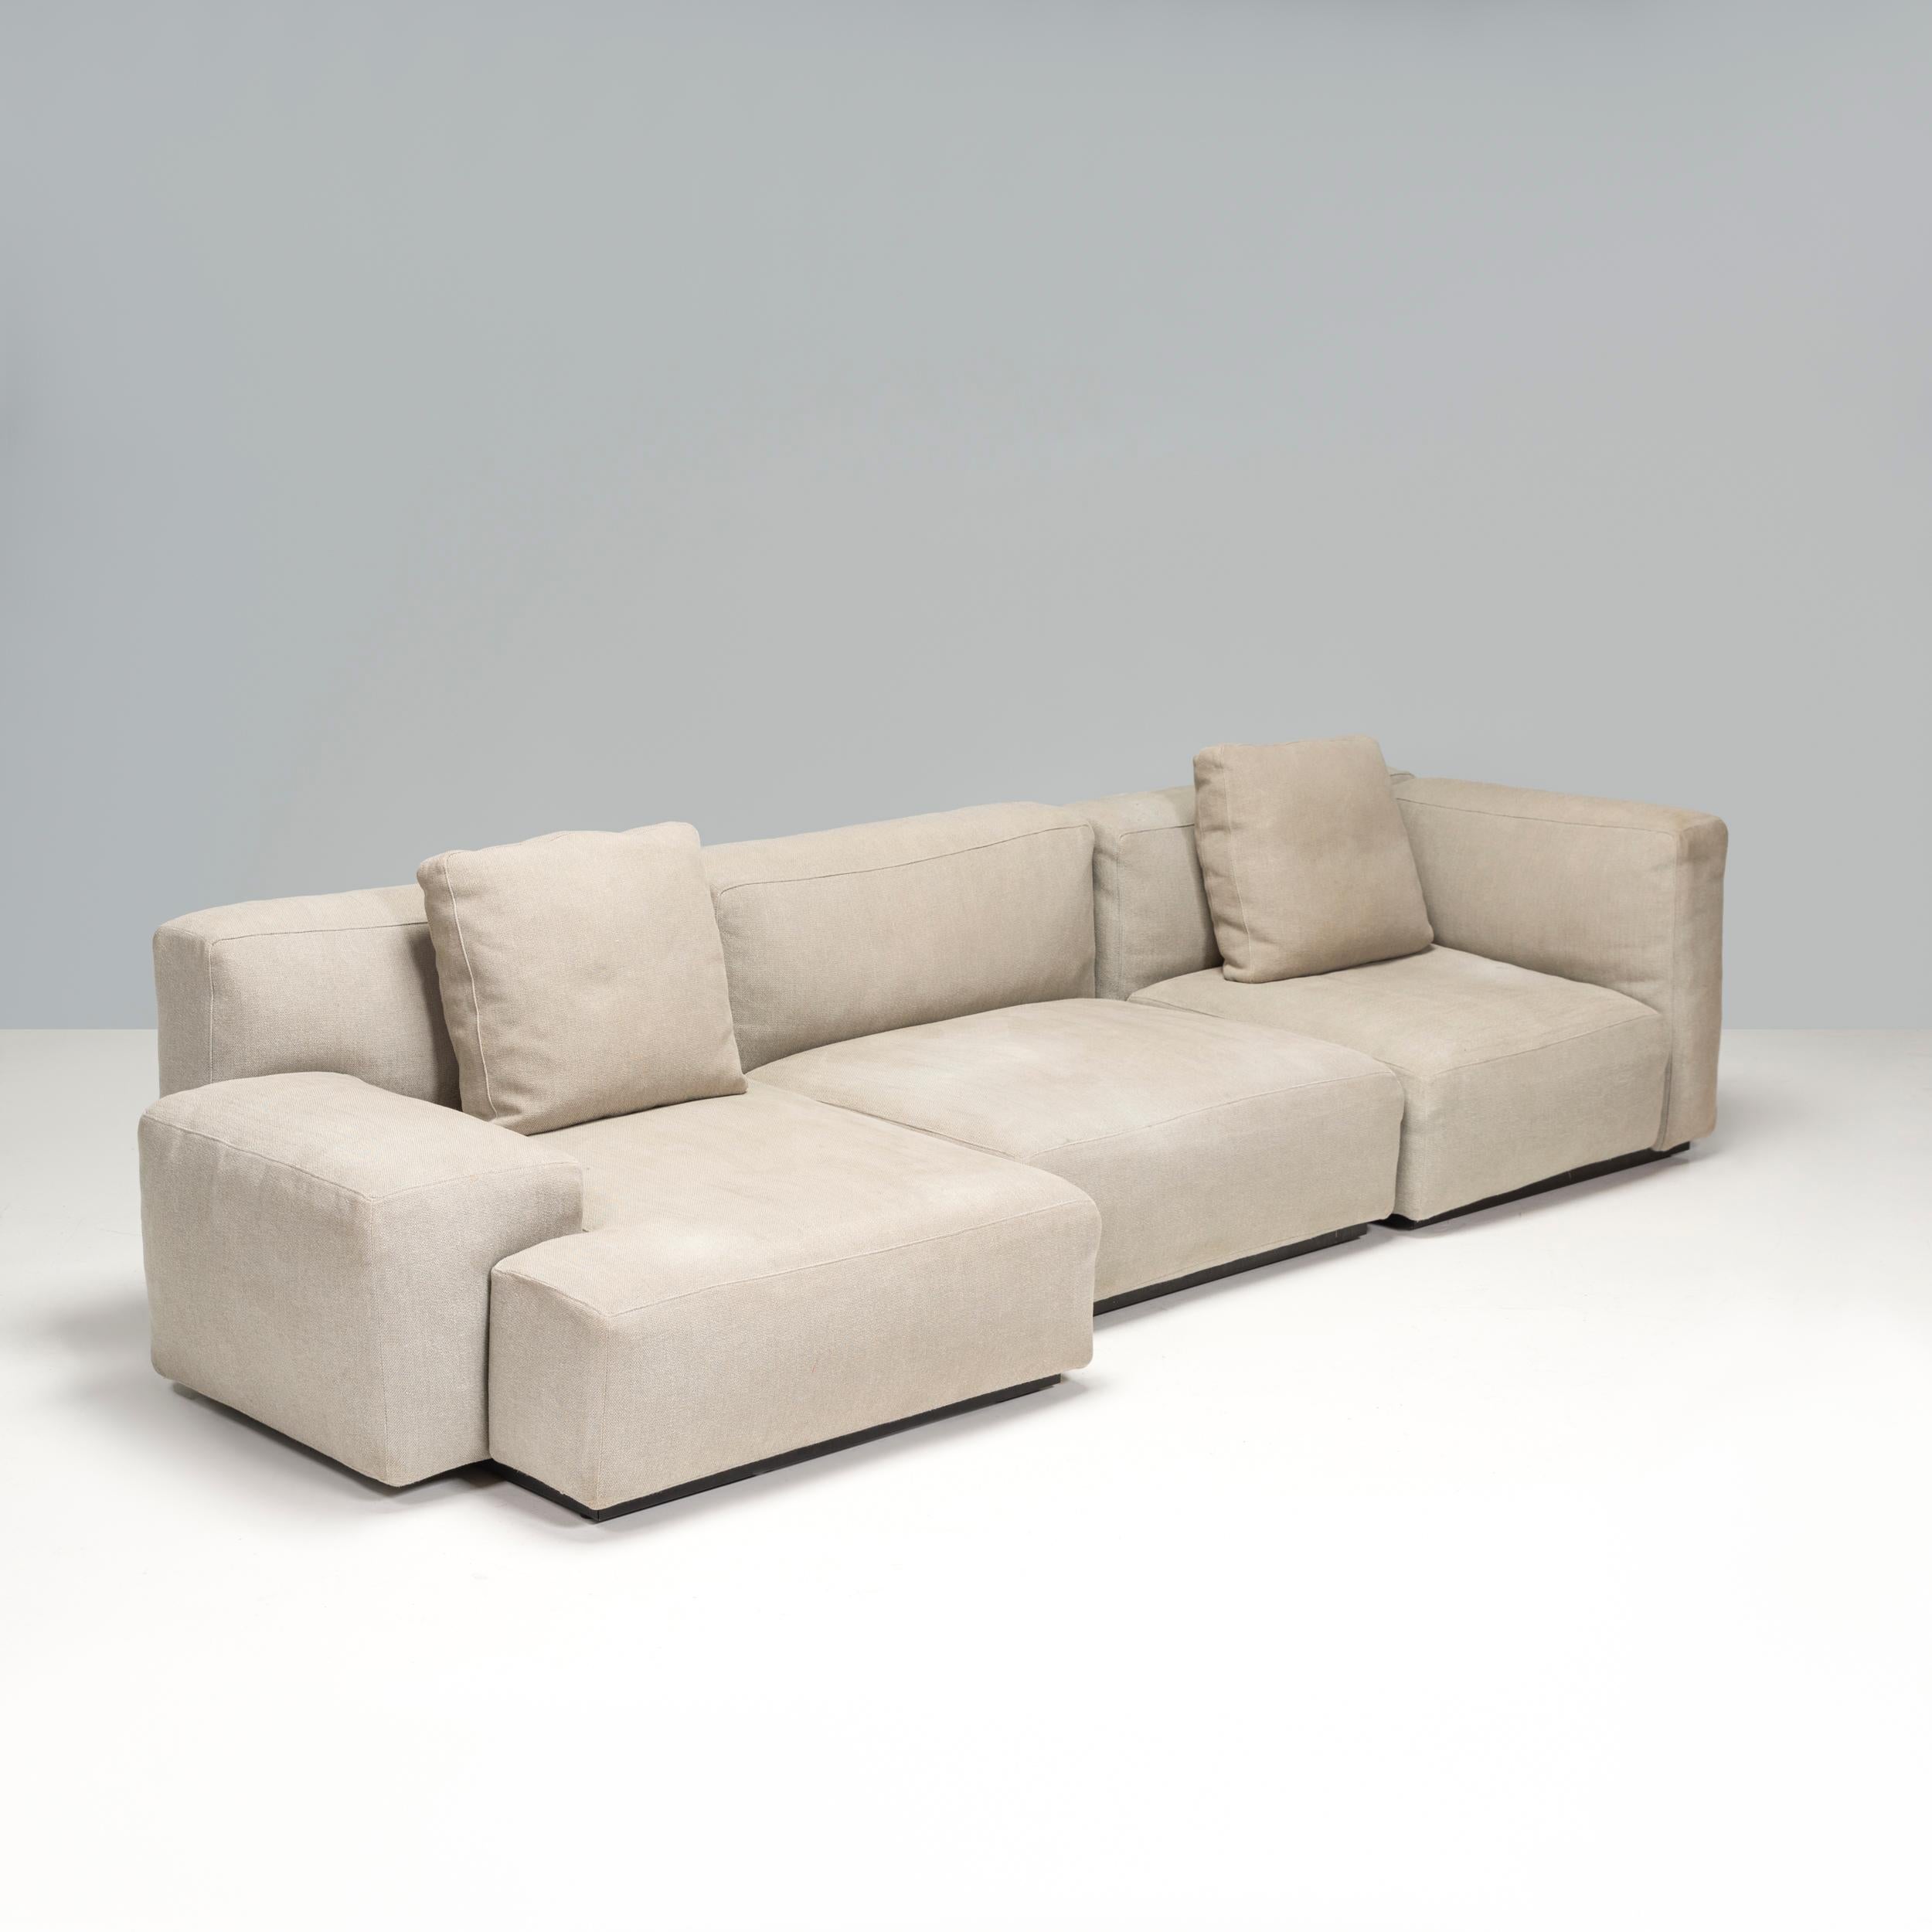 Originally designed by Piero Lissoni for Cassina in 2007, the Mex Cube sofa is a fantastic example of modern Italian design. 

Made up of three separate units, the sofa is constructed from an internal steel frame with foam cushioning and is fully